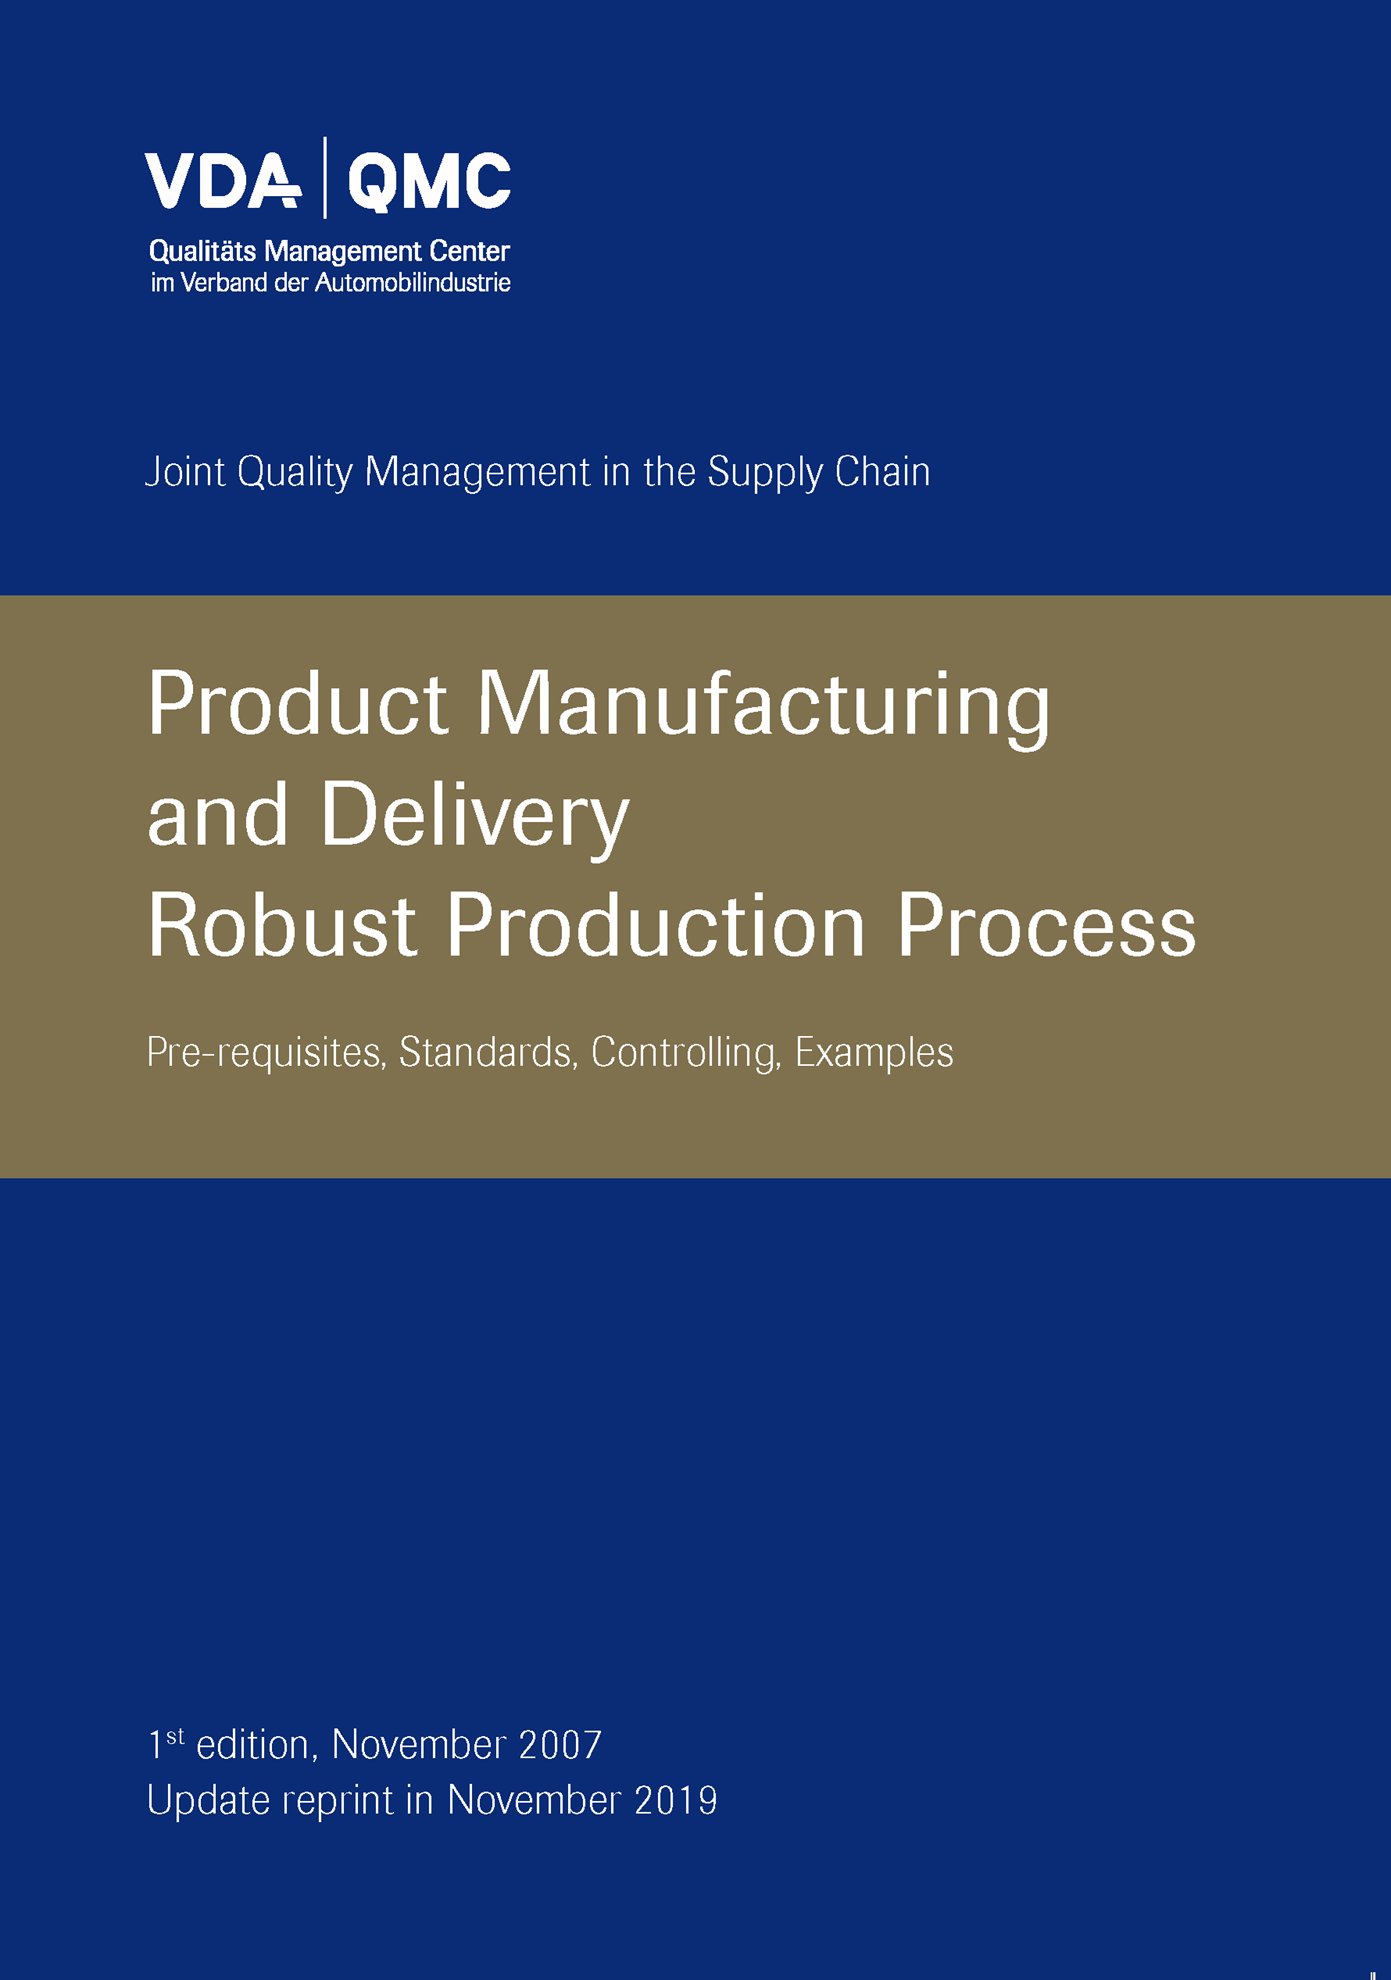 Publikácie  VDA Product Manufacturing and Delivery
 · Robust Production Process
 Prerequisites, Standards, Controlling, Examples
 1st edition November 2007 - Updated reprint, November 2019 1.11.2019 náhľad